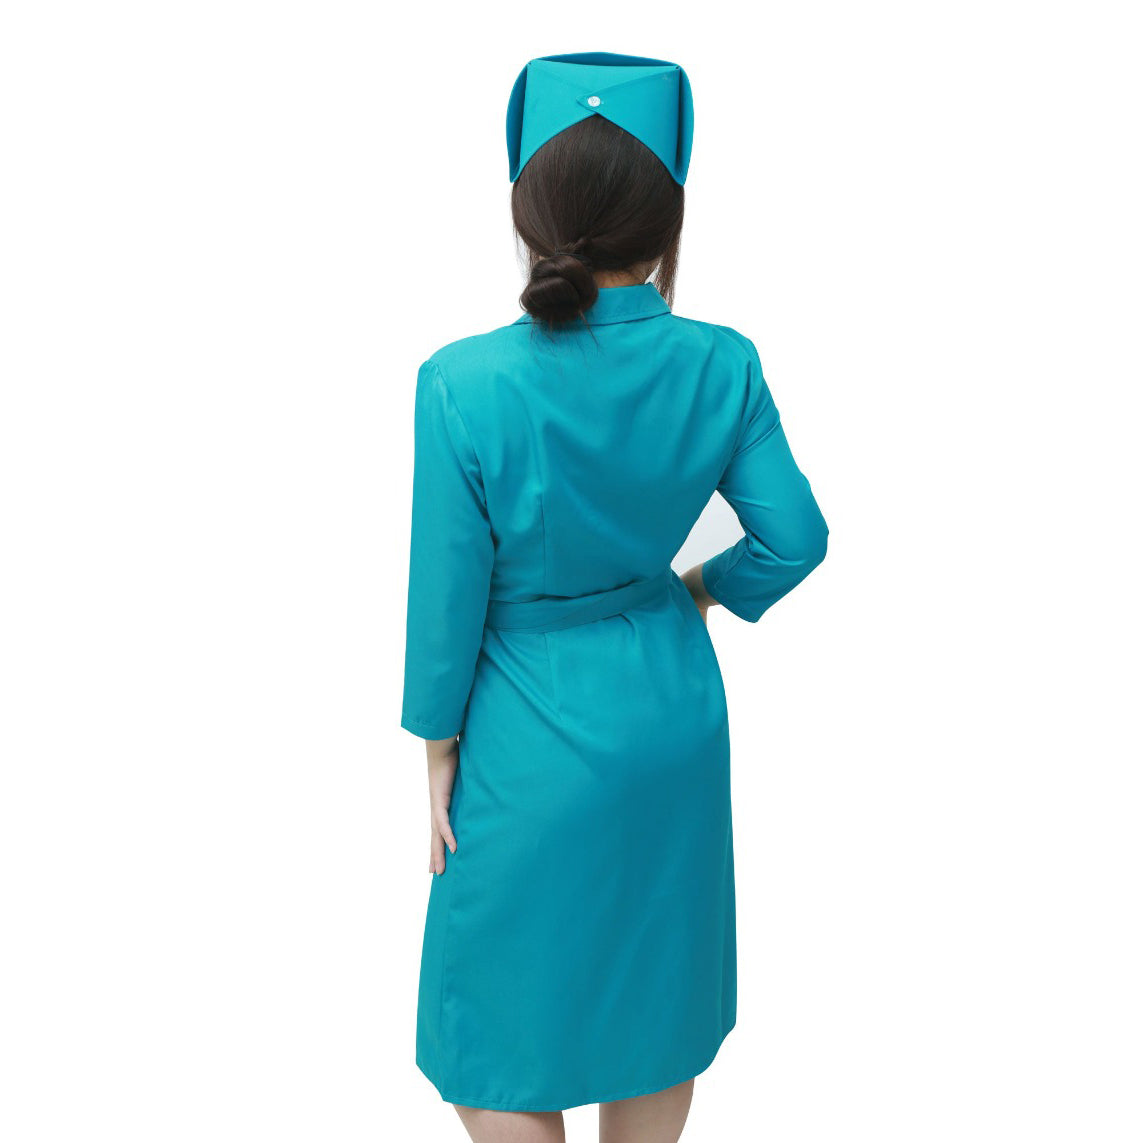 Ratched Cosplay Costume Blue Nurse Dress with Belt and Hat